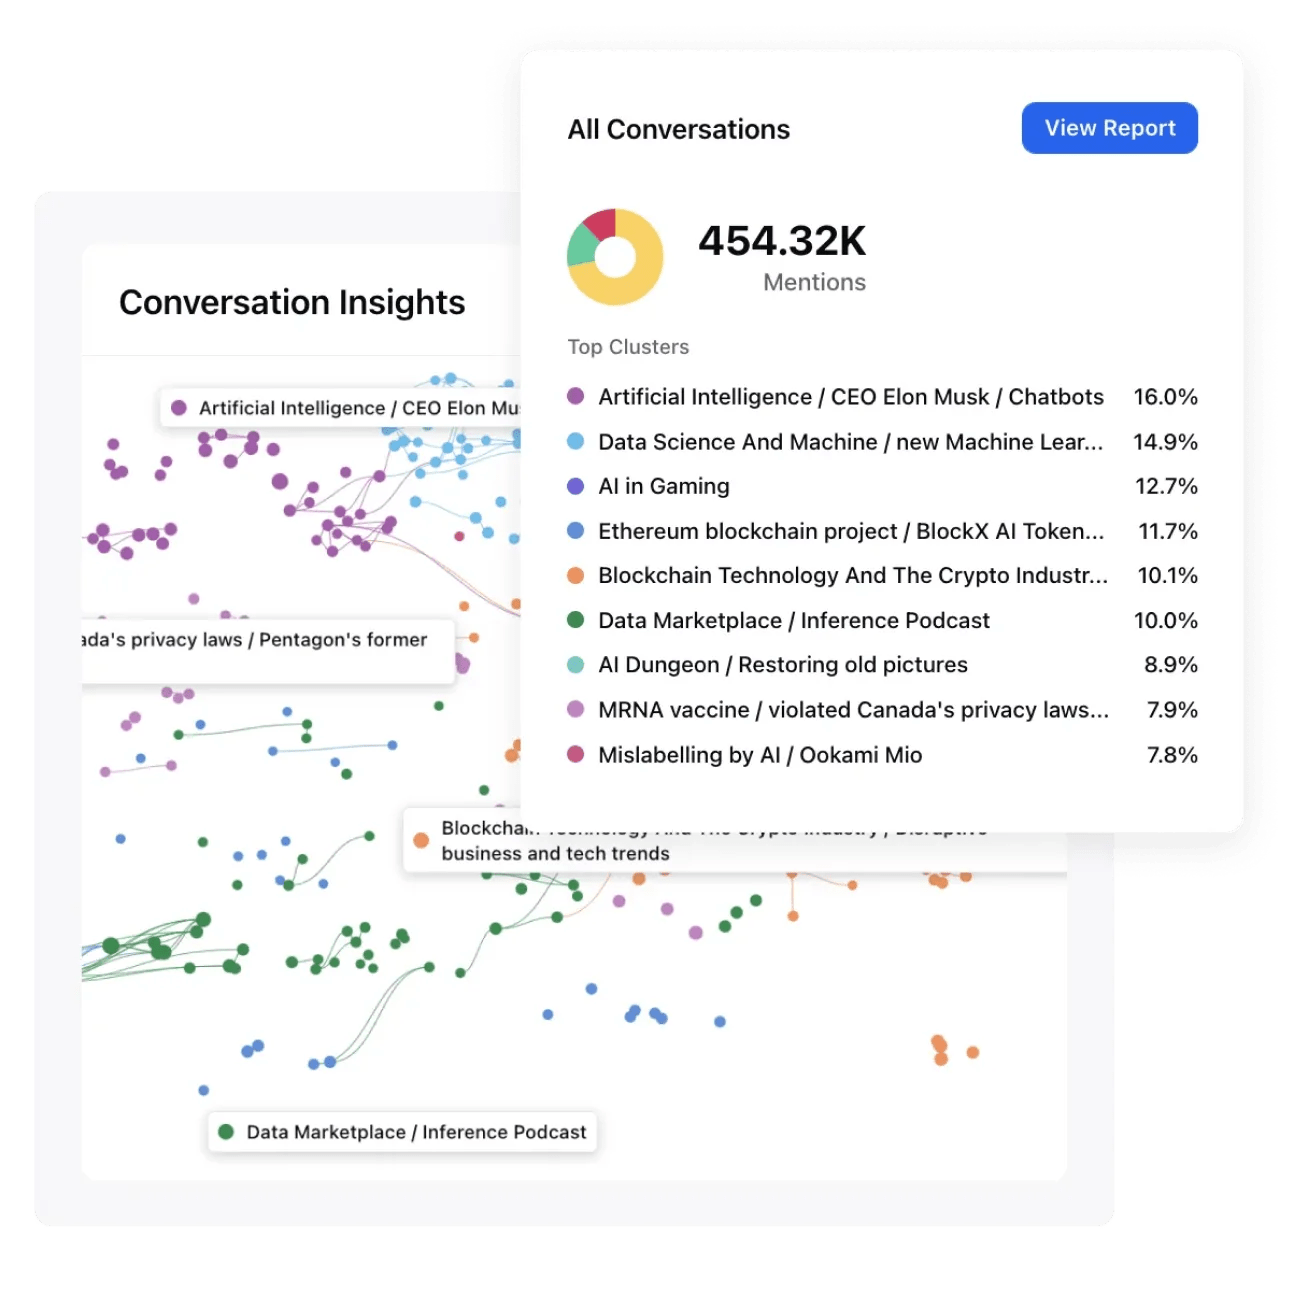 Sprinklr users can listen to data from millions of conversations — including 200 billion historical messages across 30+ digital channels.